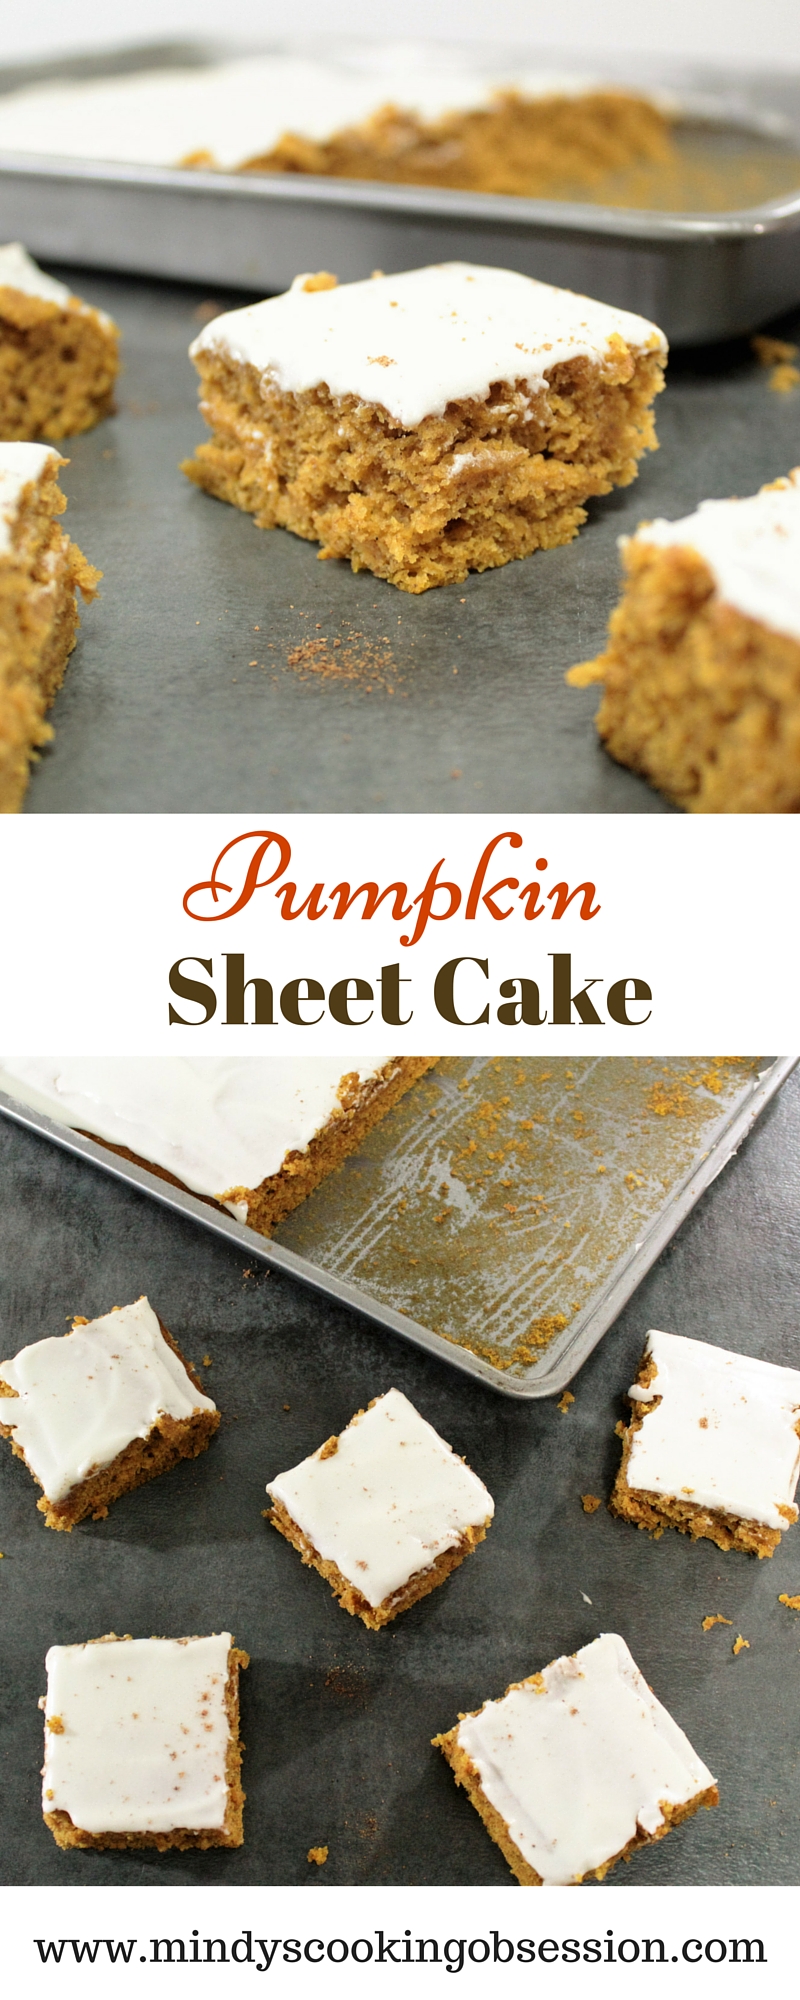 White flour combined with wheat flour as well as yogurt in the frosting make this recipe for Pumpkin Sheet Cake a little healthier than traditional recipes.